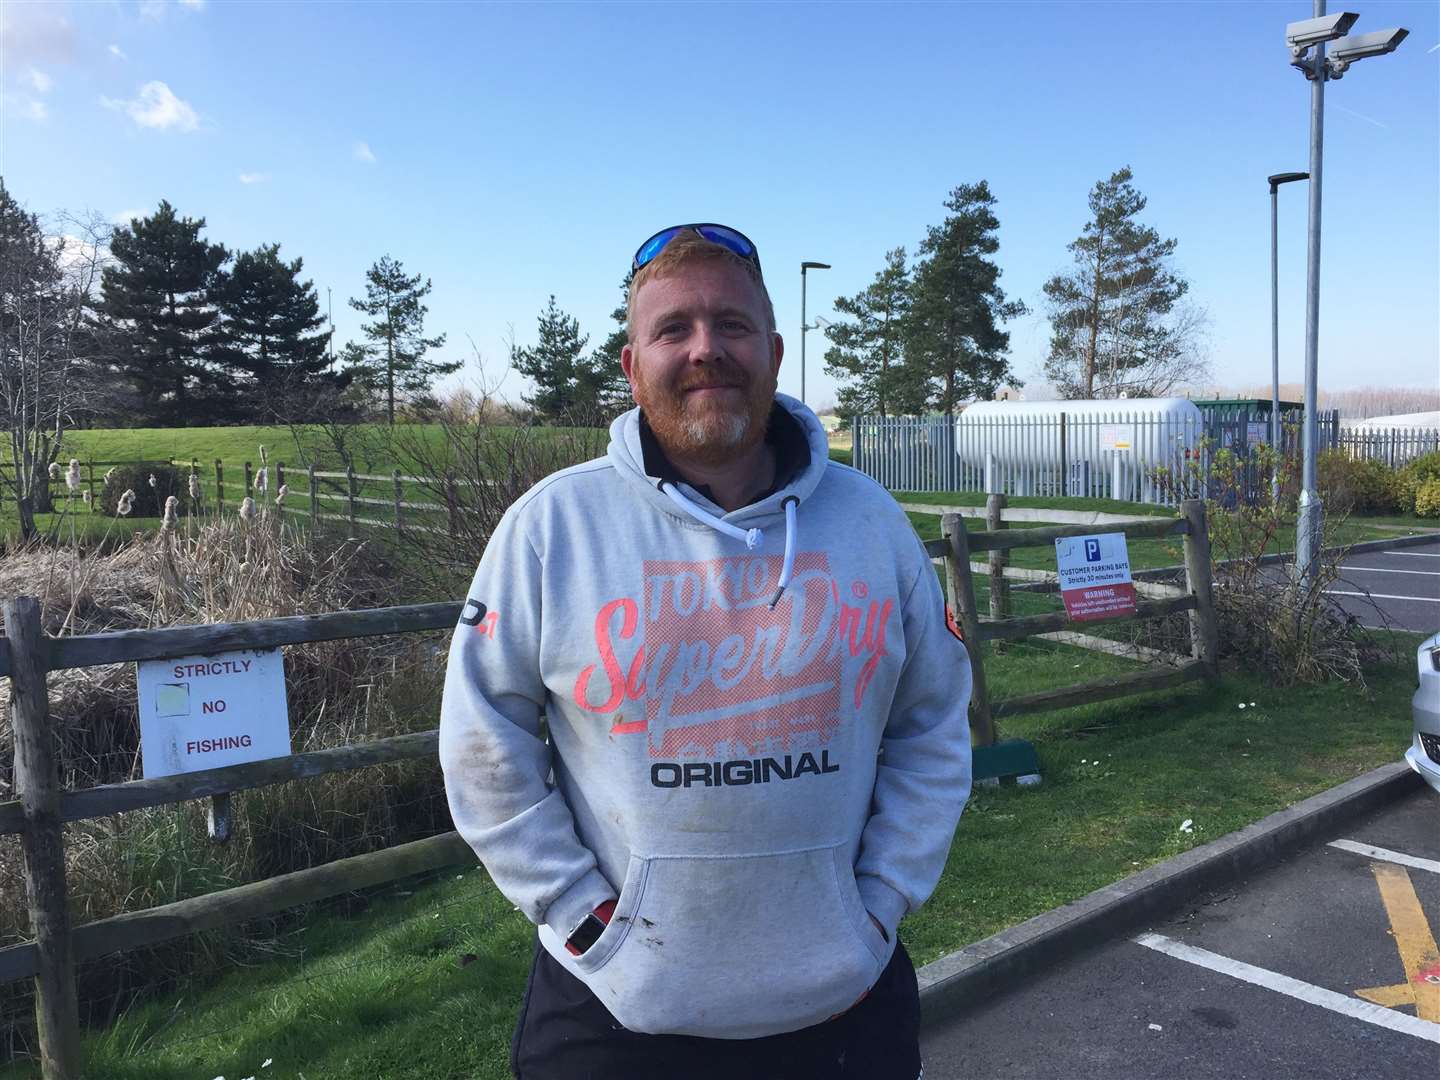 Dave Ferris, 34, who is based in Queenborough, told how he has to be "careful of the everyday viability of going to sea" because of the price of red diesel